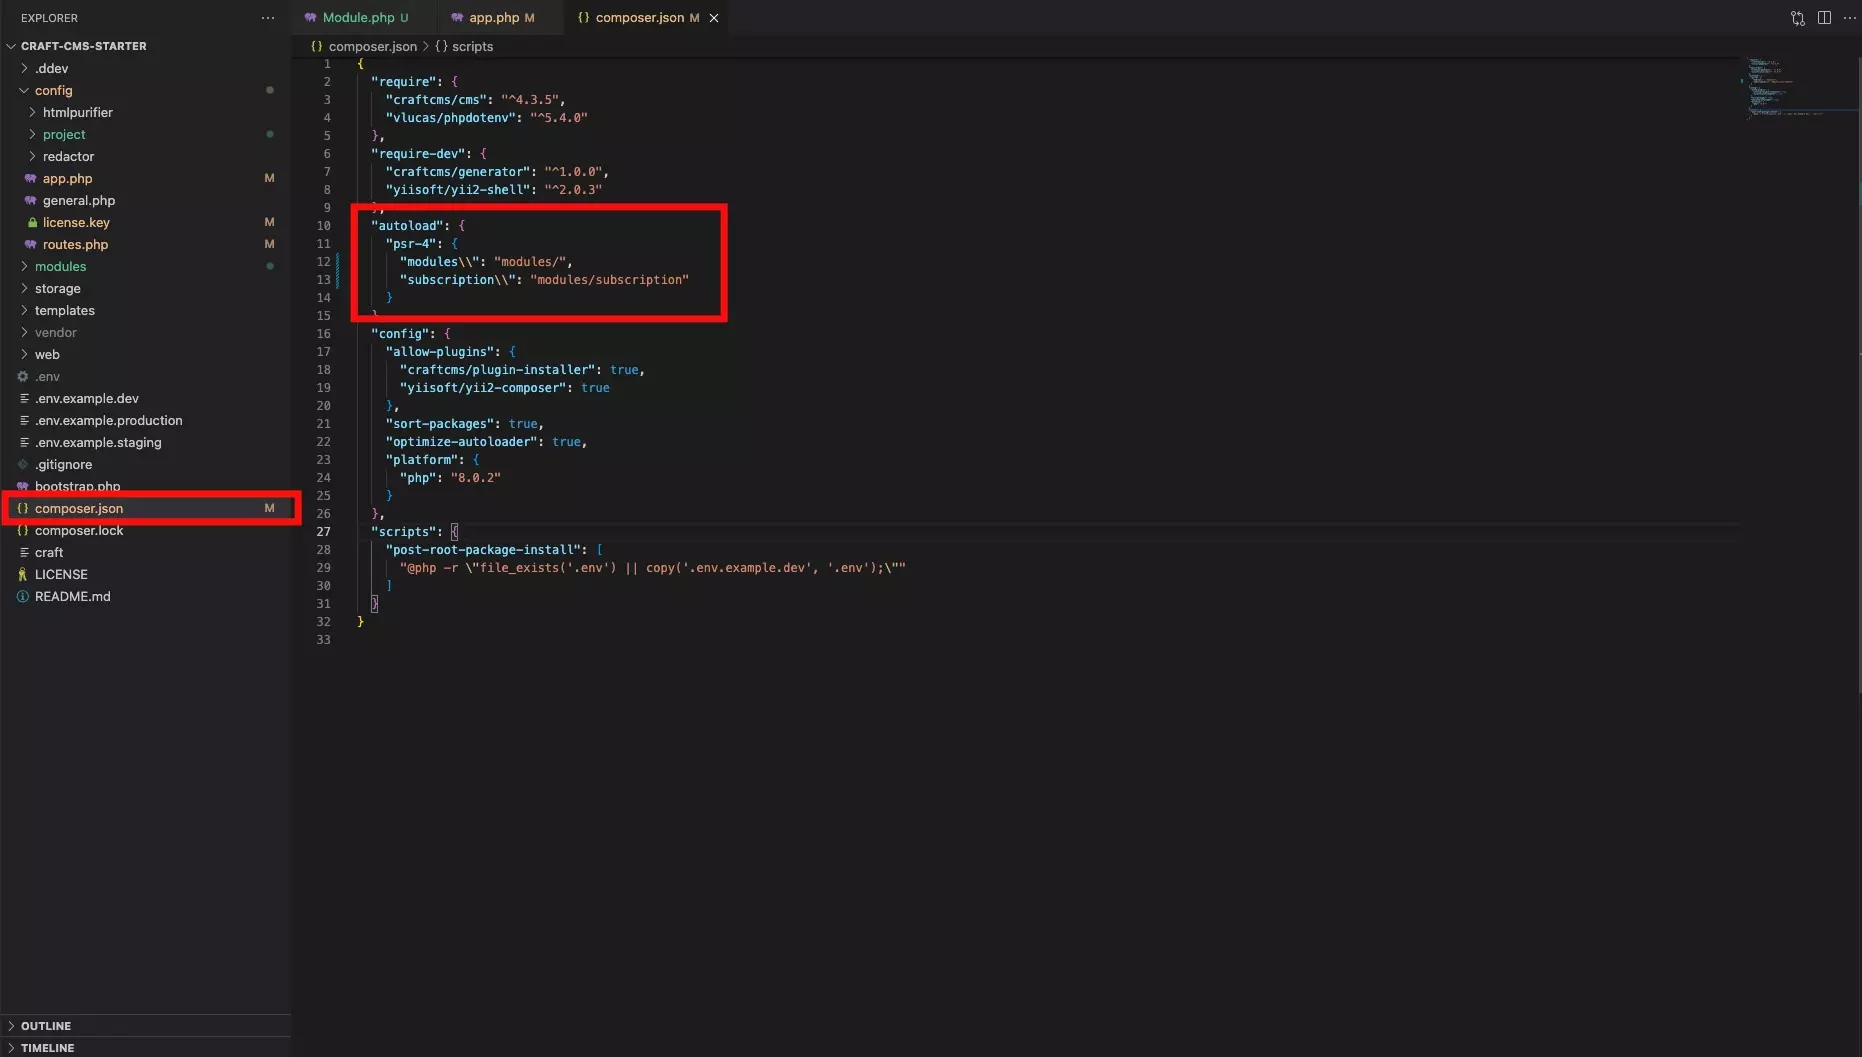 A screenshot of VSCode showing the modified composer.json file.